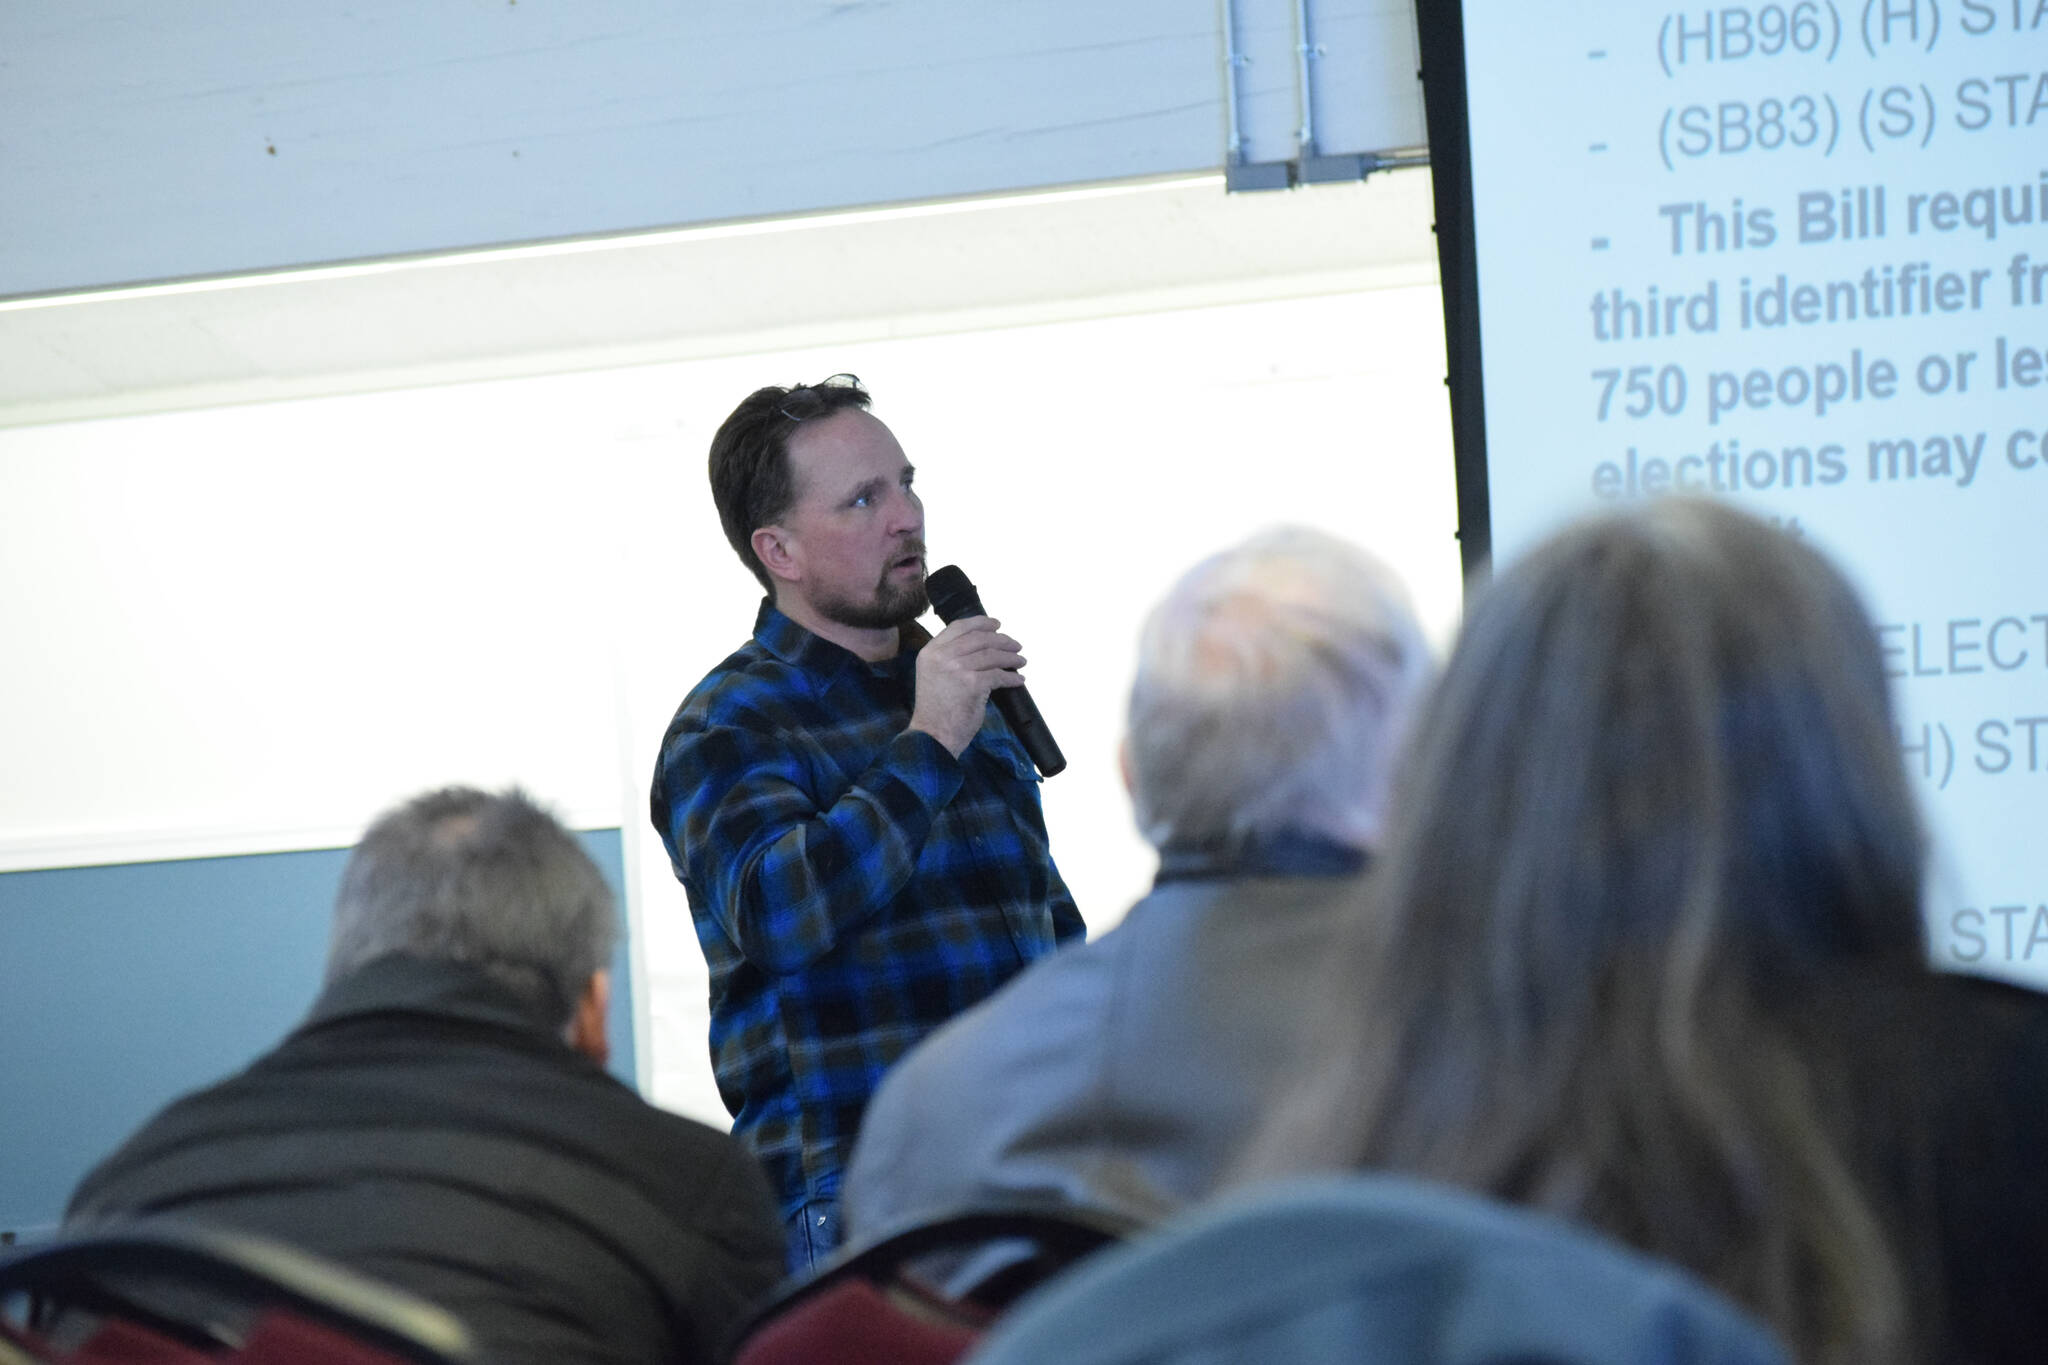 House Rep. Ben Carpenter speaks at a town hal meeting in Nikiski on Saturday, March 5, 2022. (Camille Botello/Peninsula Clarion)